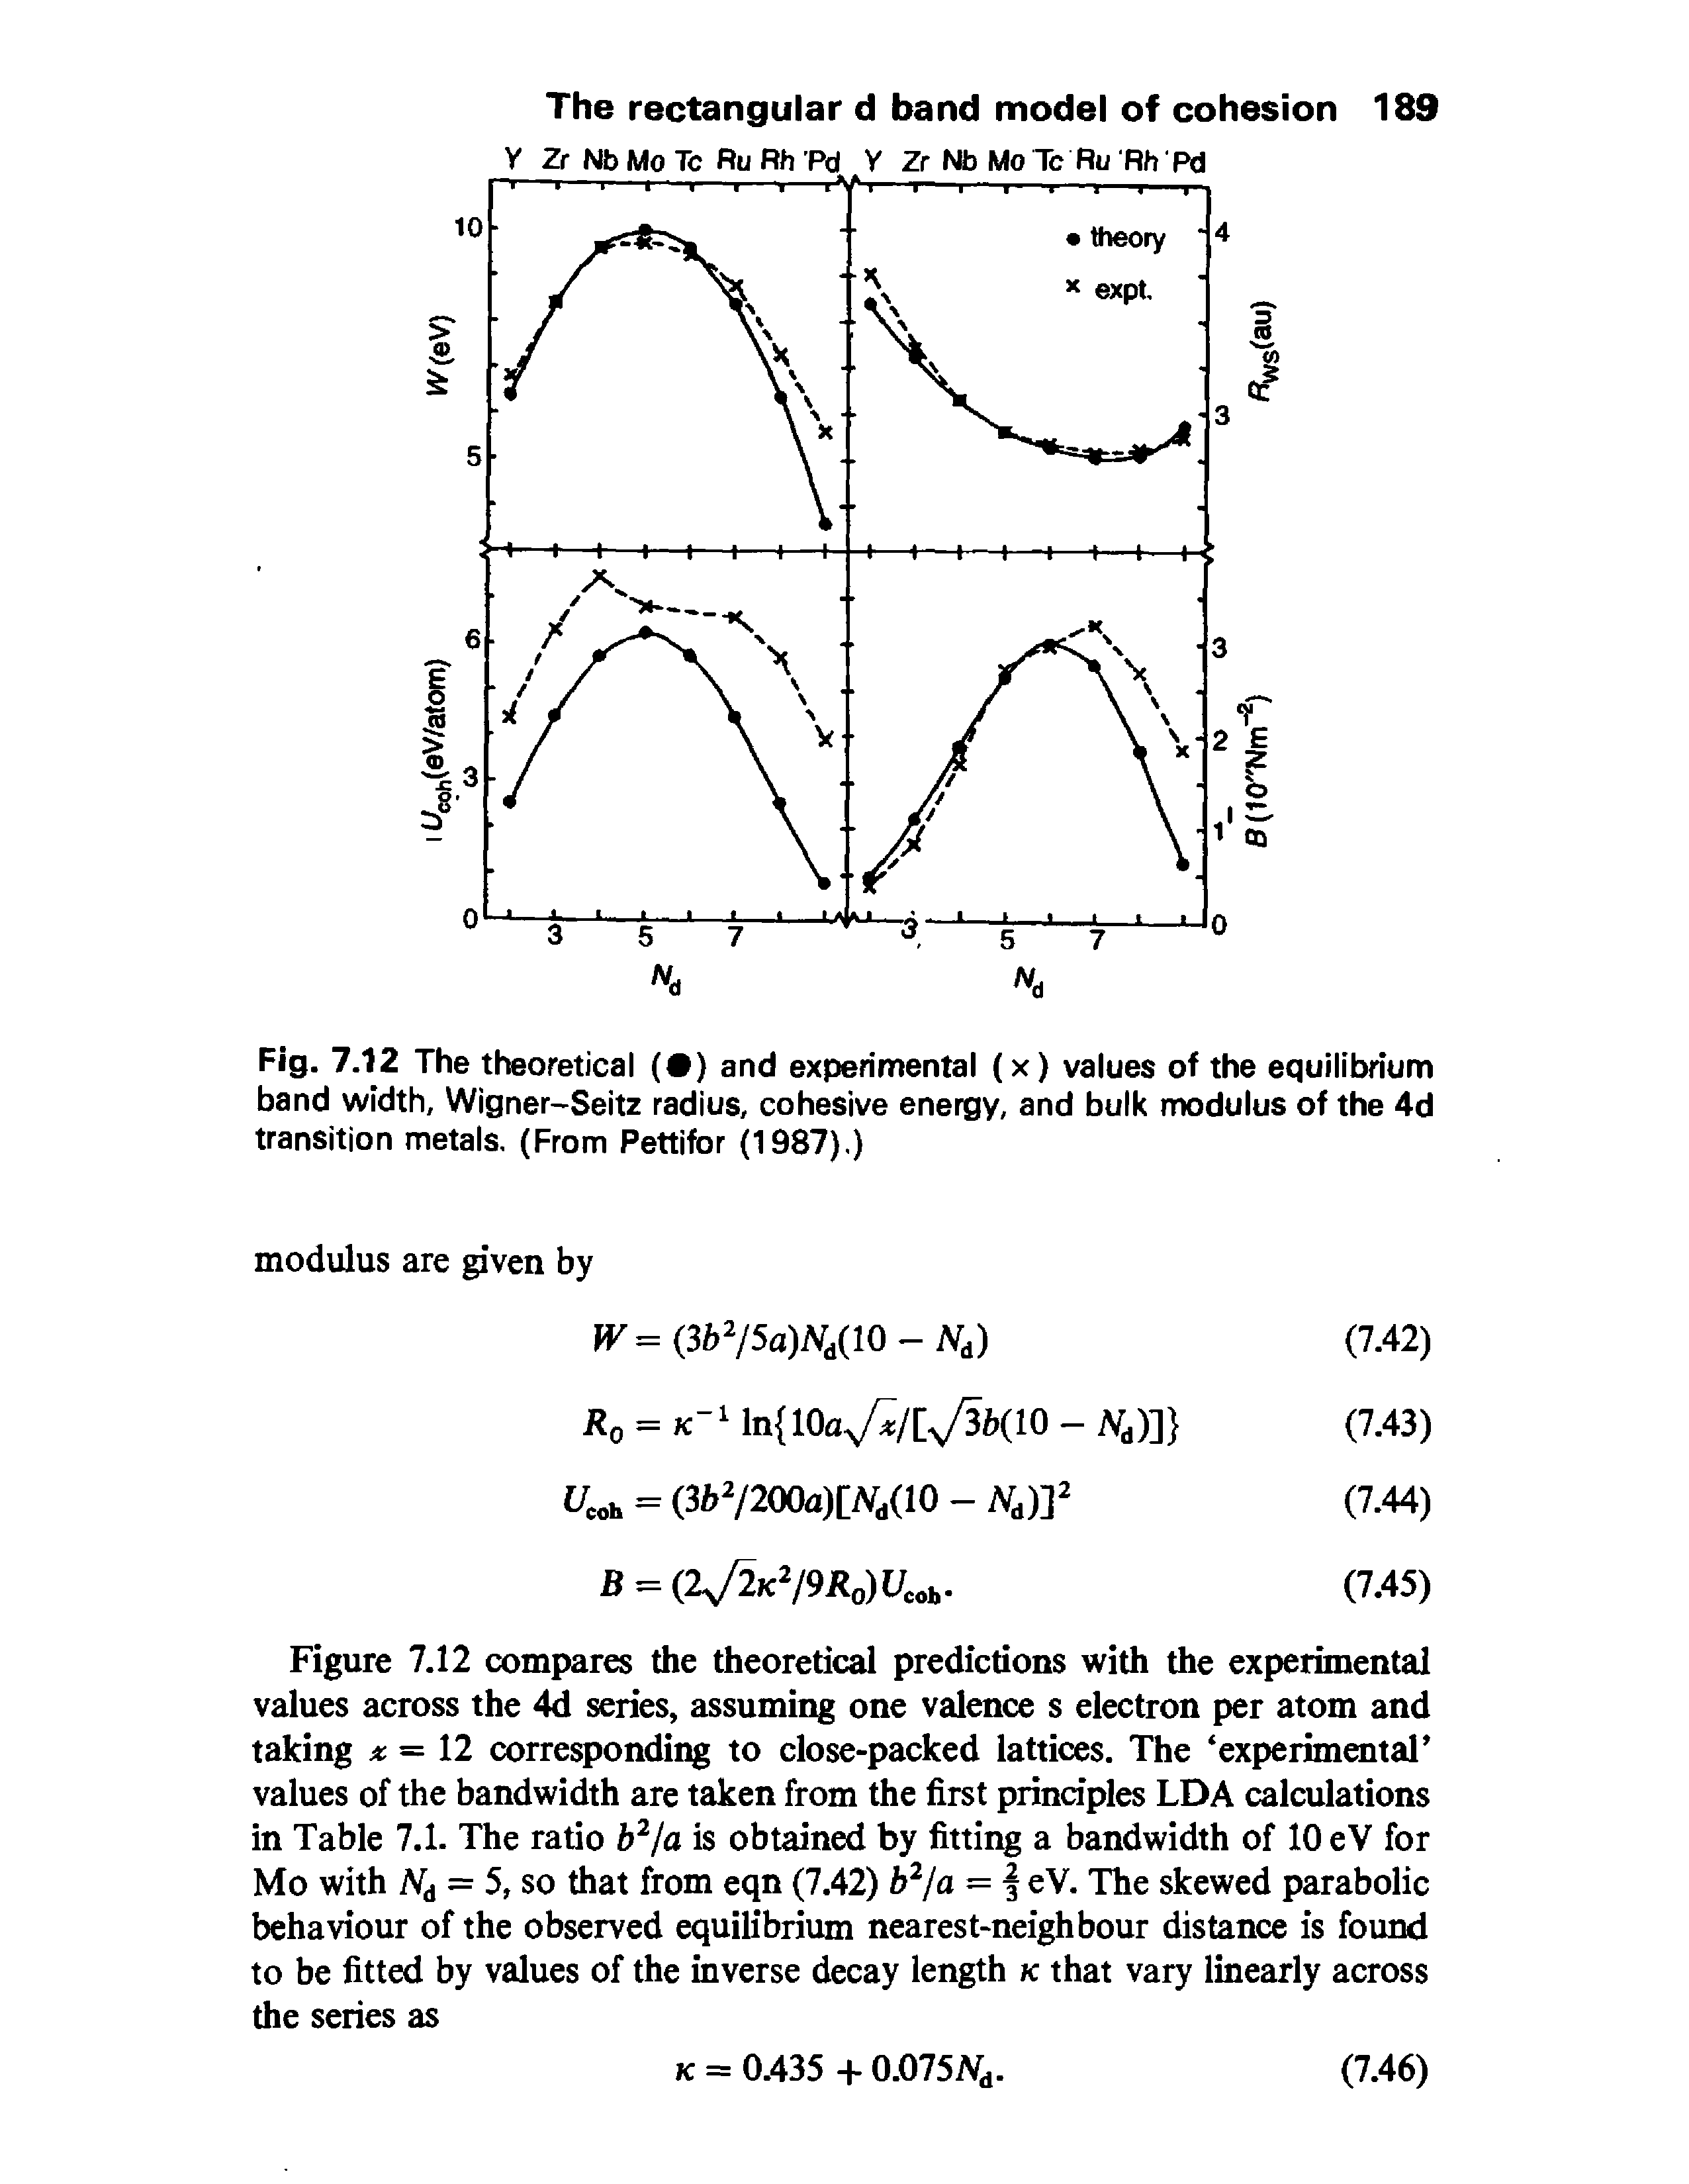 Fig. 7.12 The theoretical ( ) and experimental (x) values of the equilibrium band width, Wigner-Seitz radius, cohesive energy, and bulk modulus of the 4d transition metals. (From Pettifbr (1987).)...